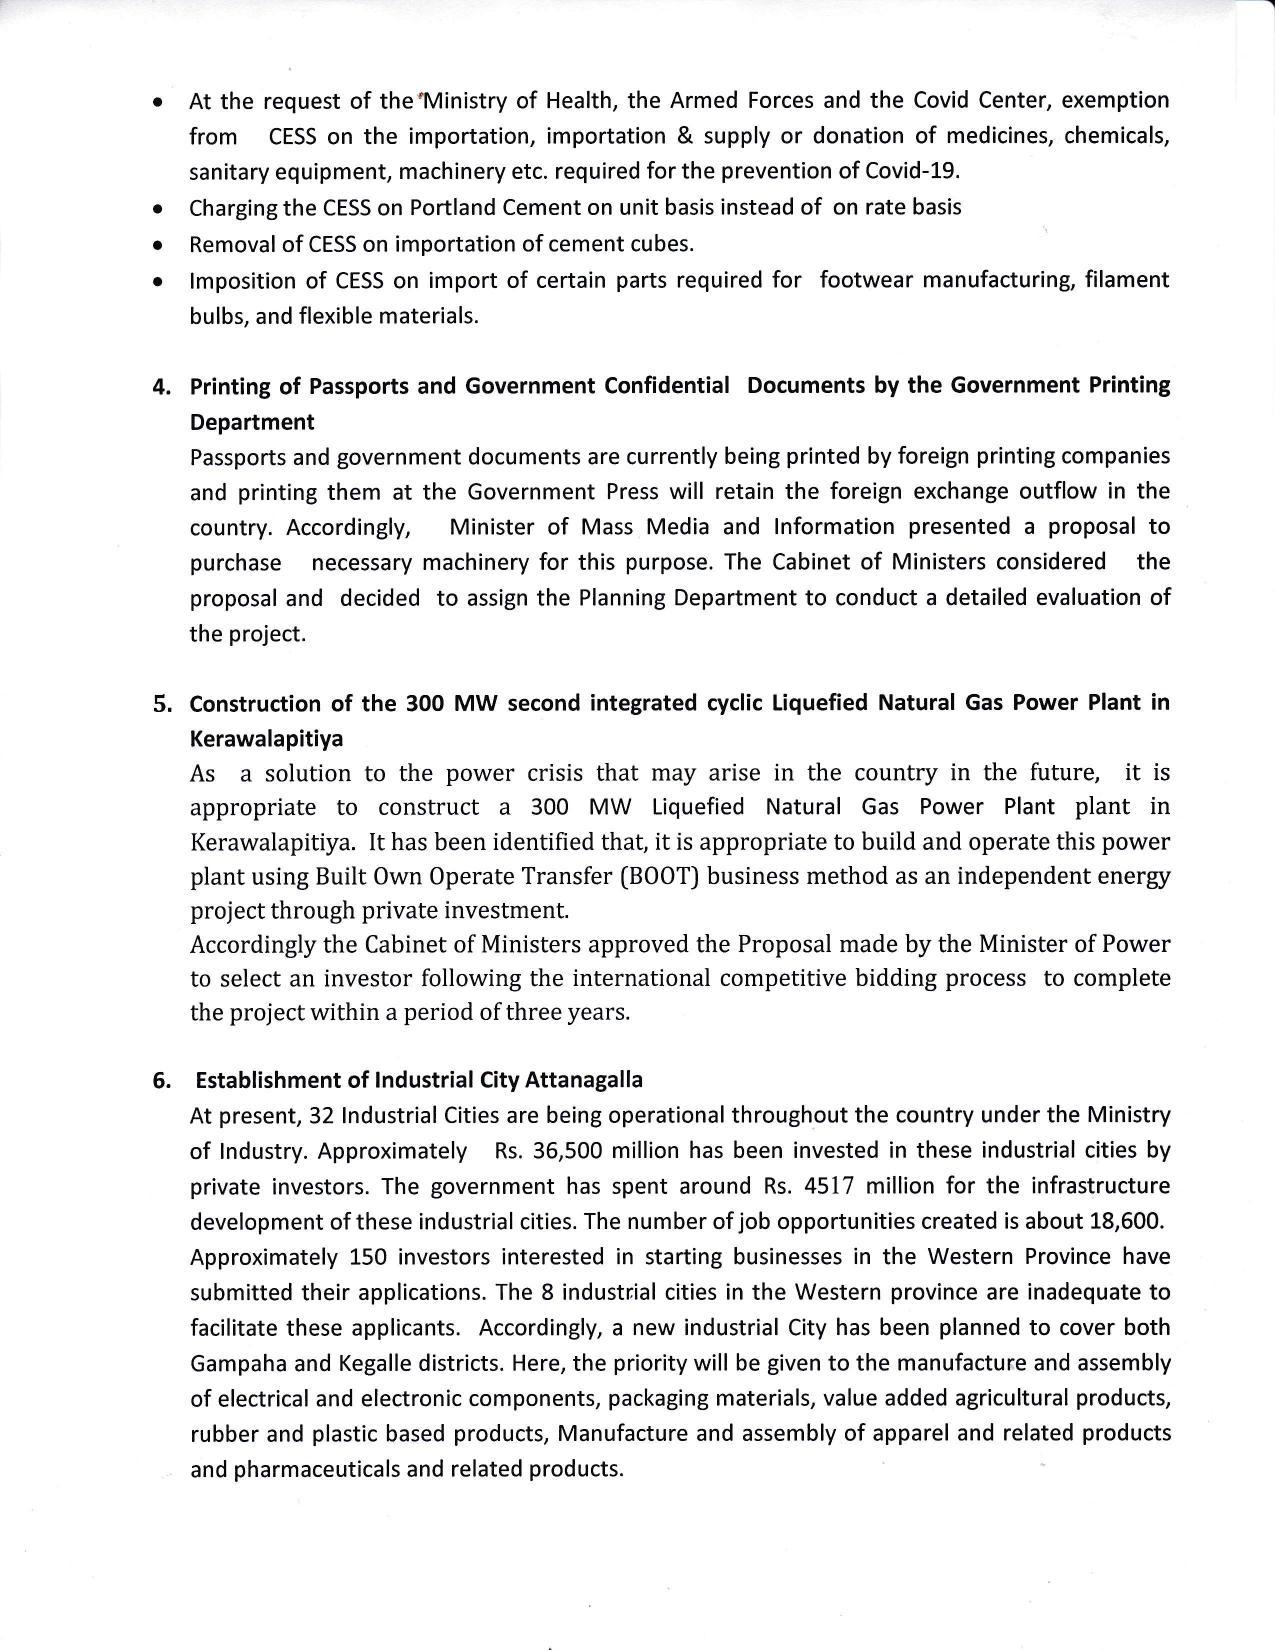 Cabinet Decision English on 16.09.2020 page 002